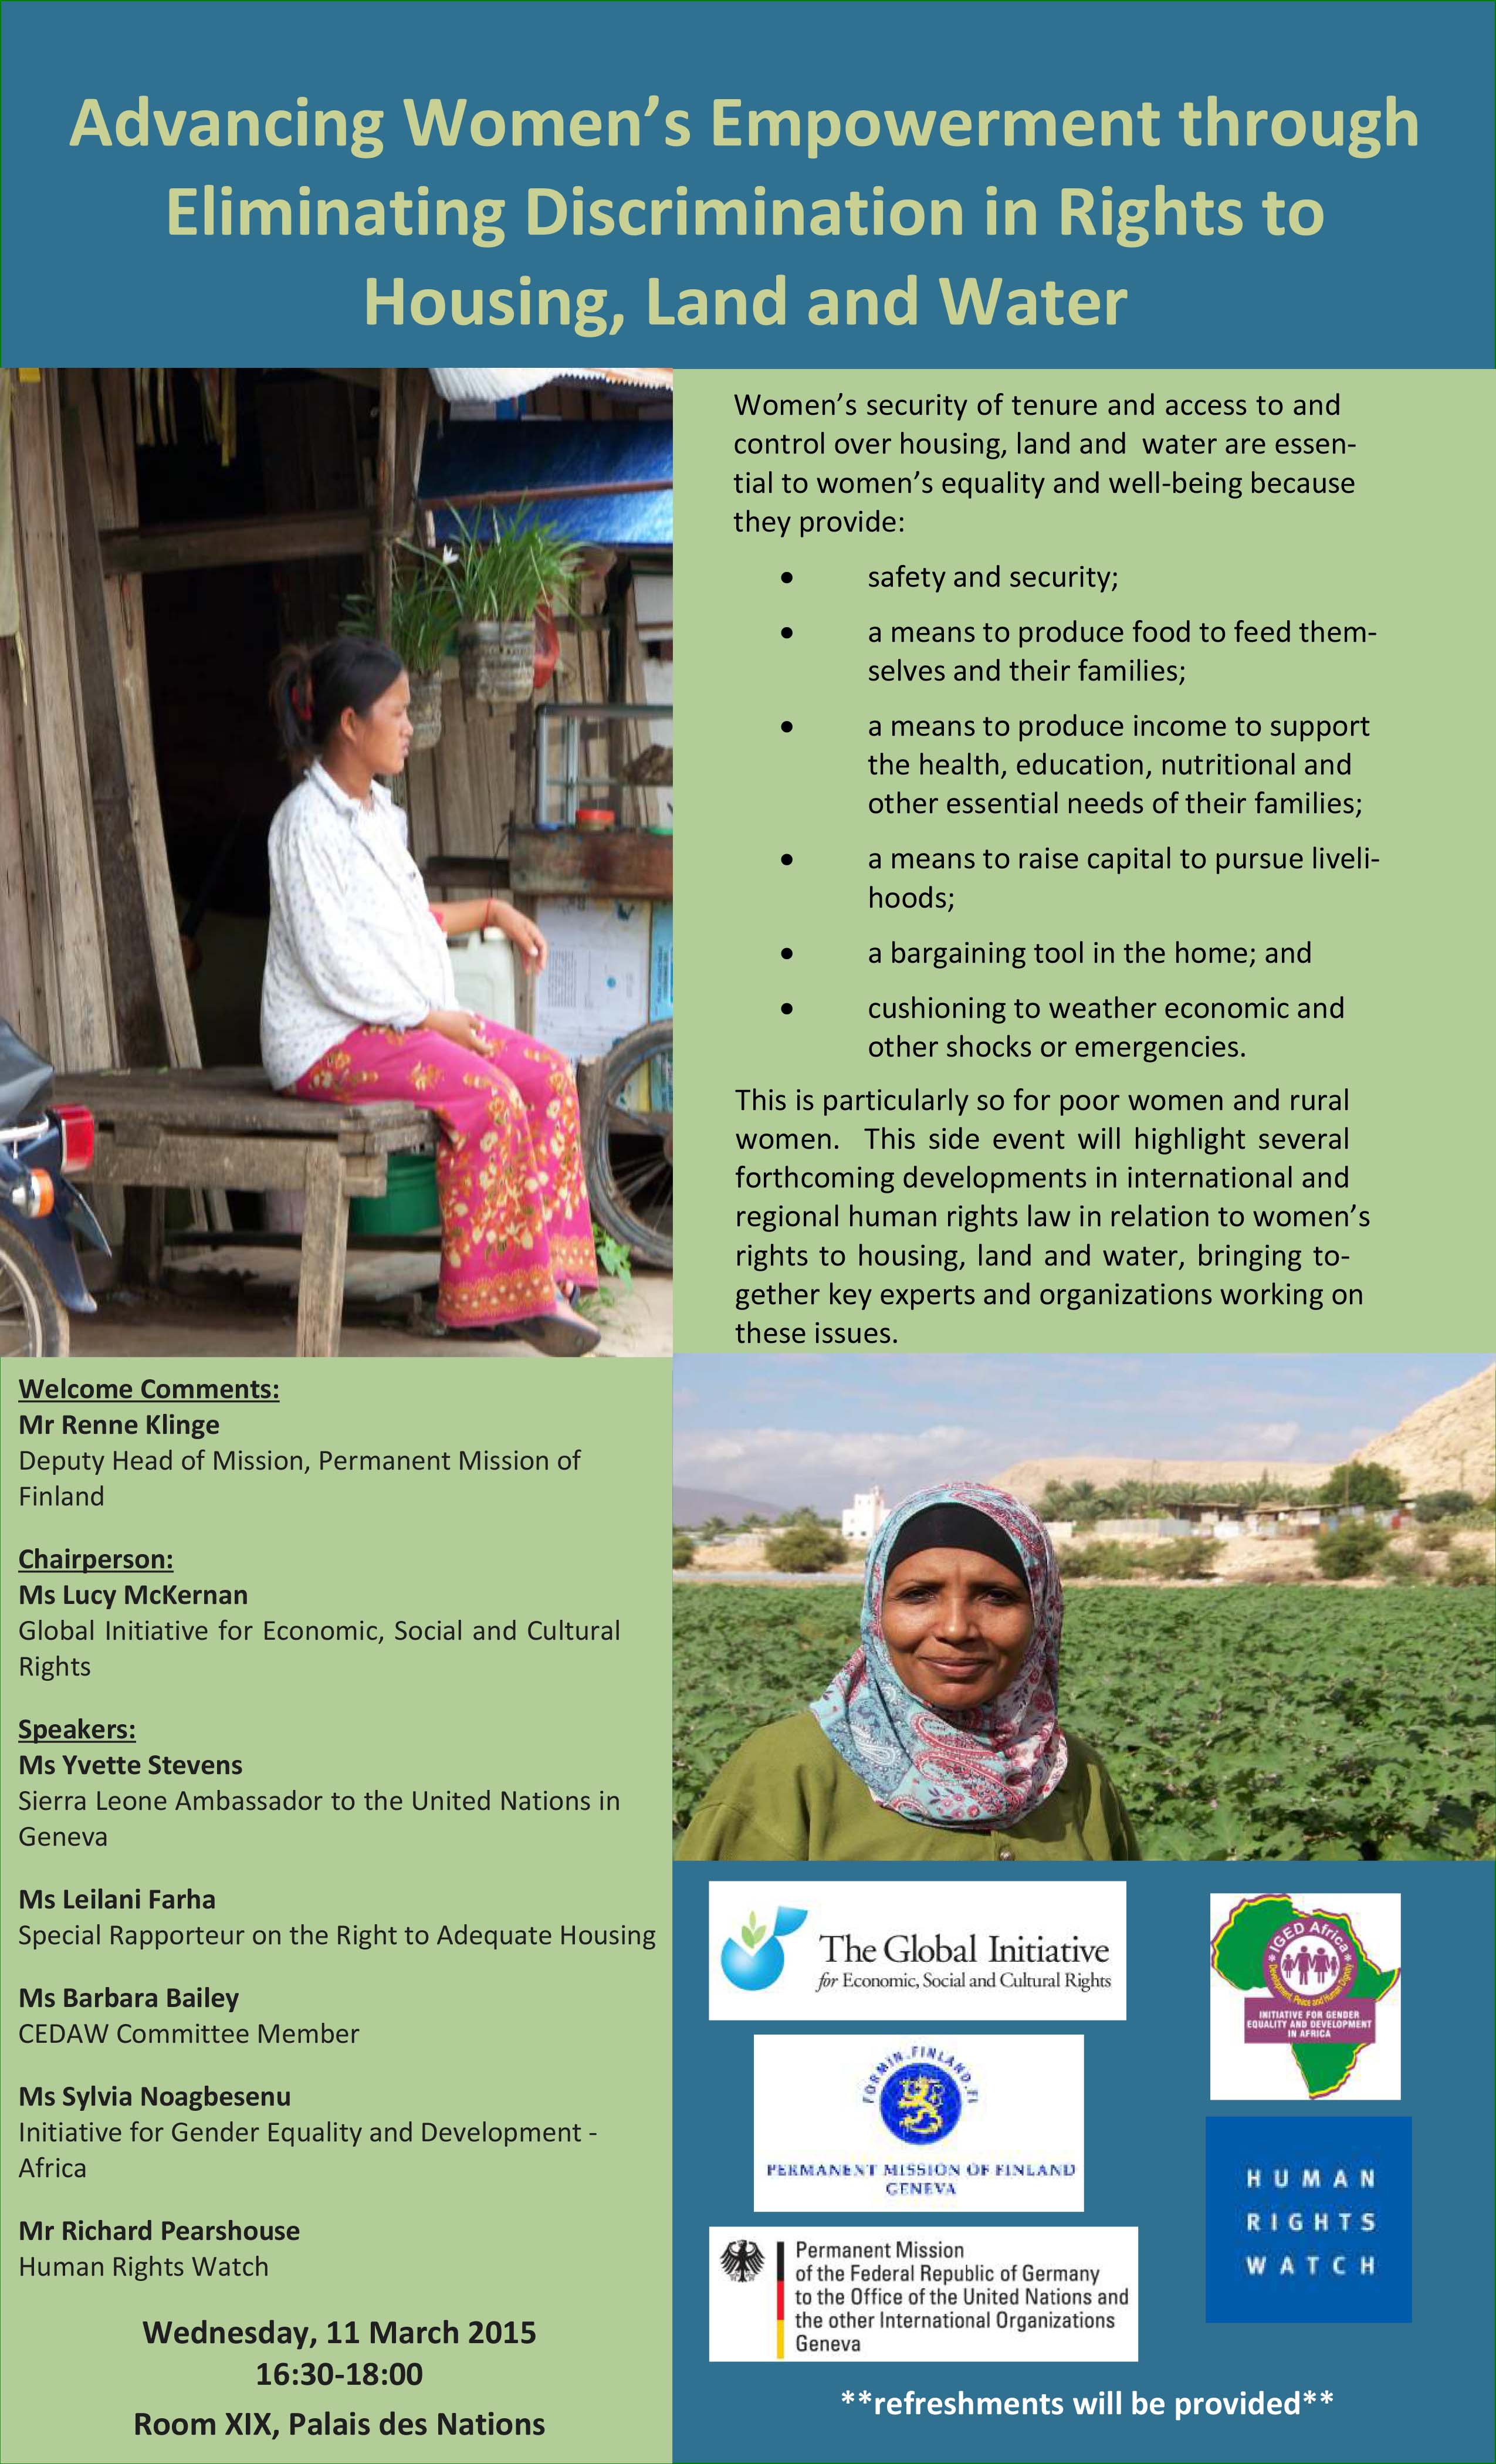 Side event: Advancing Women’s Empowerment through Eliminating Discrimination in Rights to Housing, Land and Water